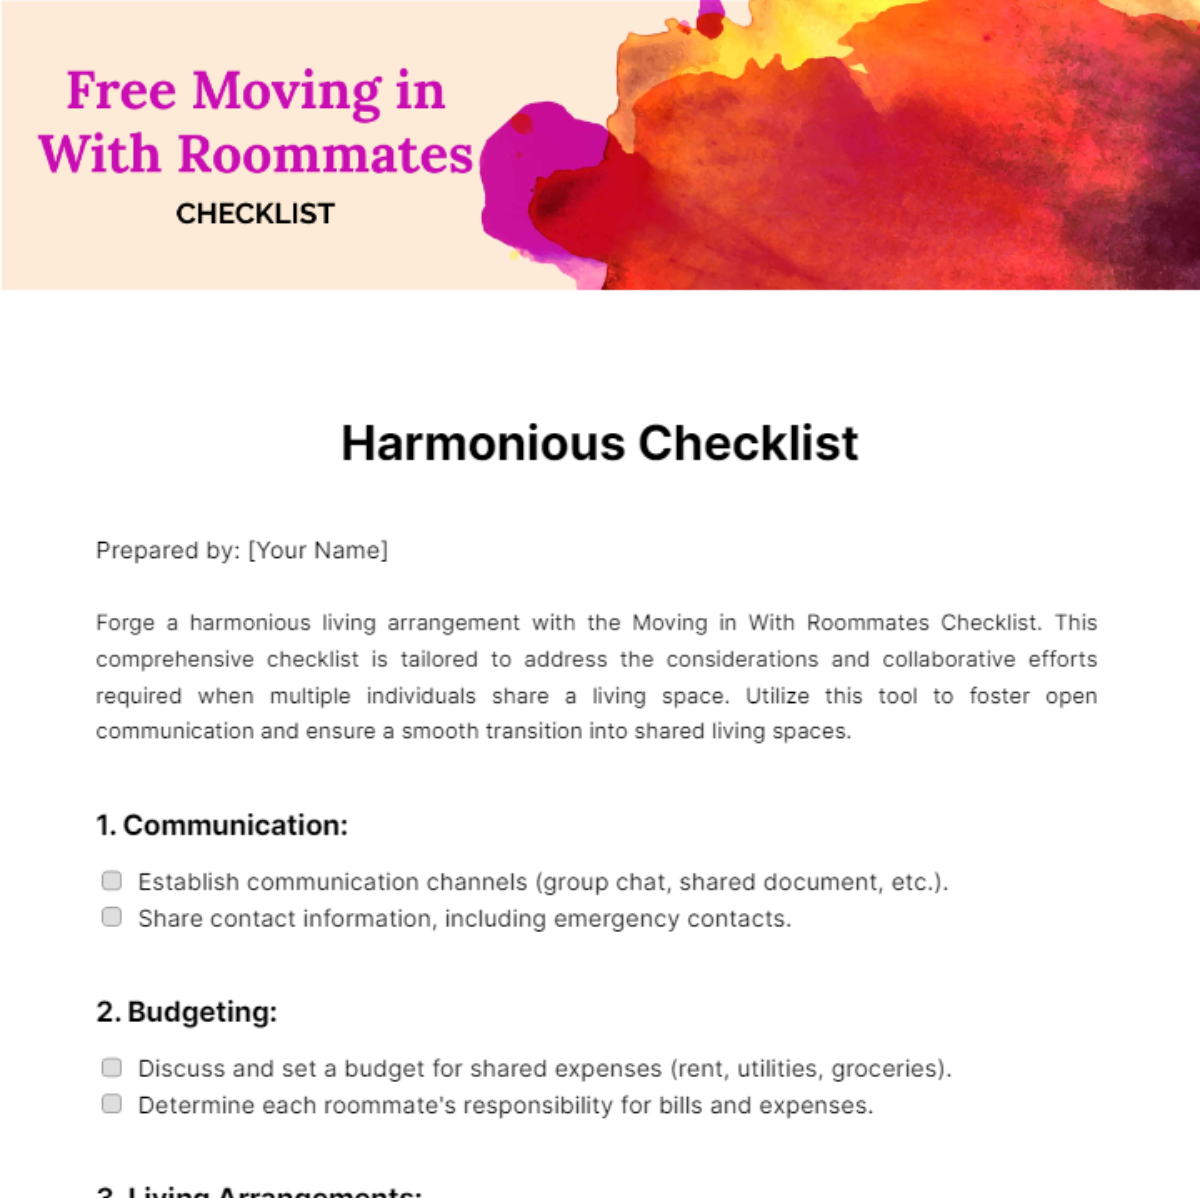 Moving in With Roommates Checklist Template